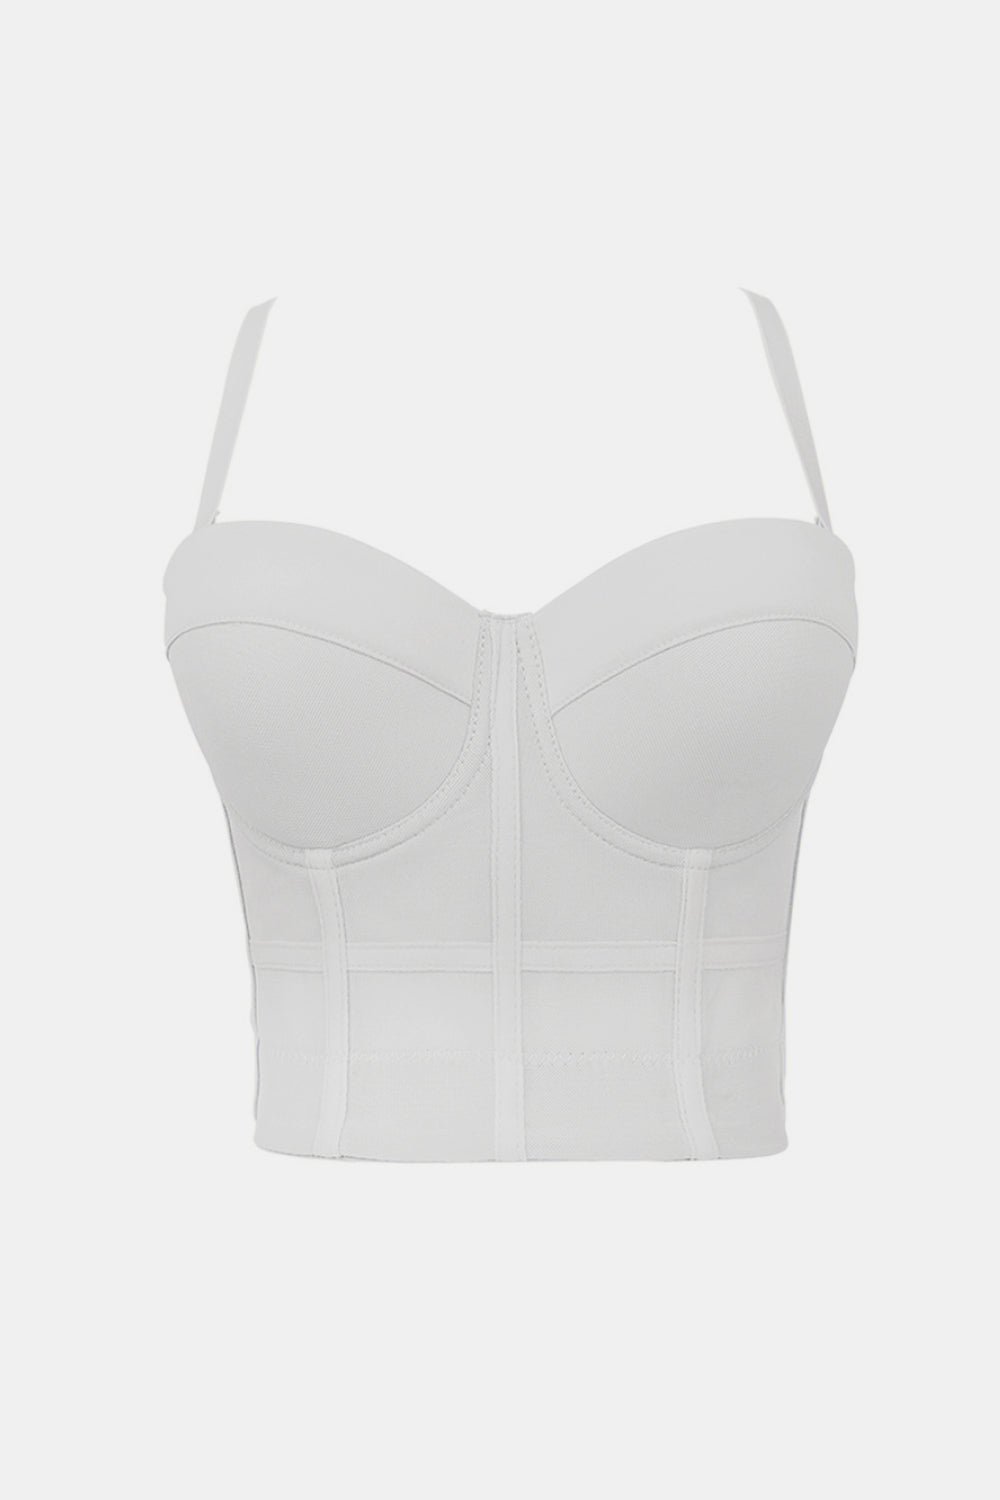 Demi Cup Bustier with Boning